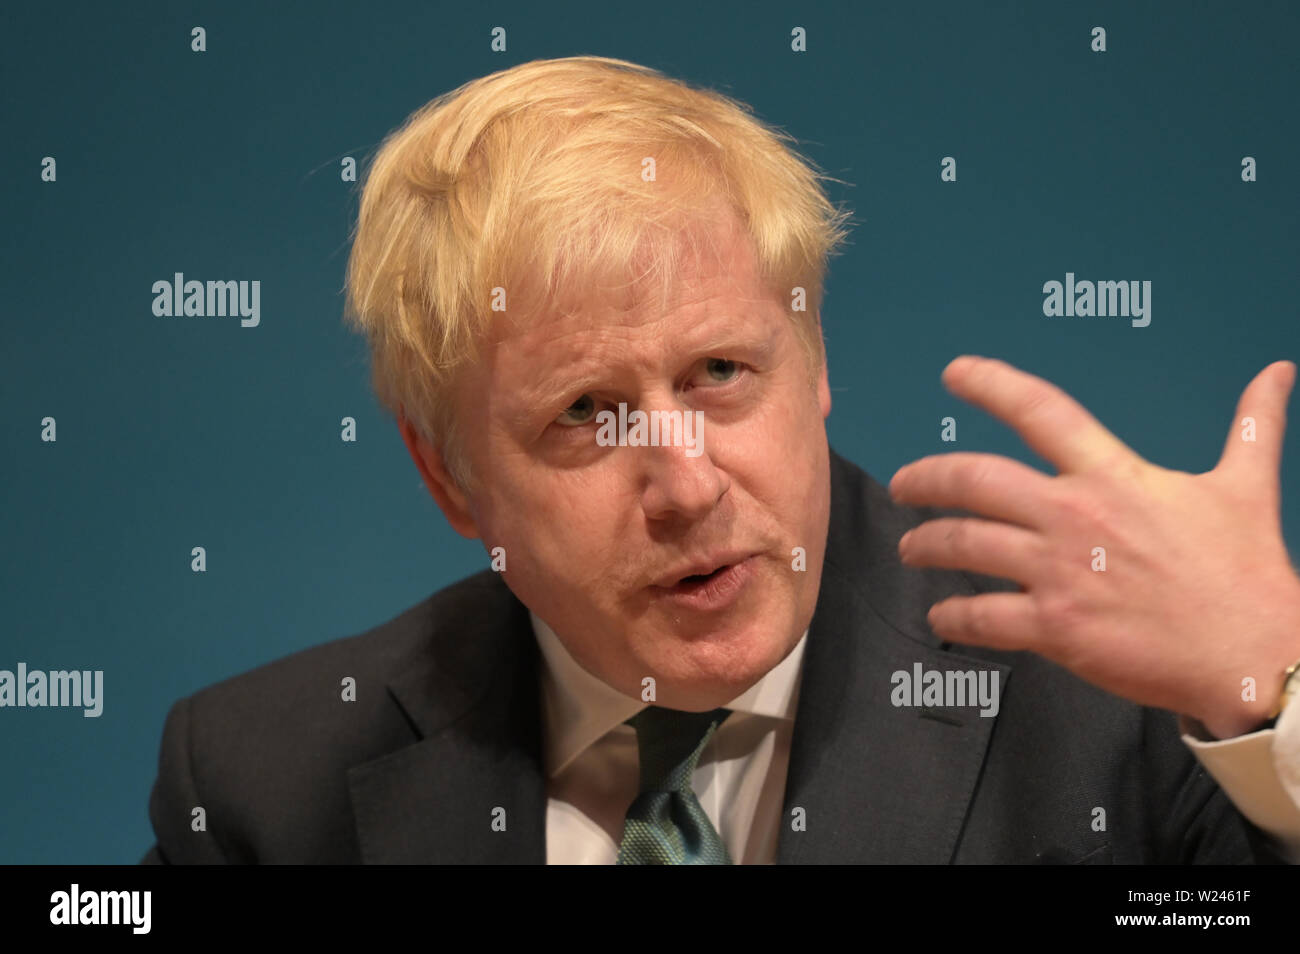 Perth, Scotland, United Kingdom, 05, July, 2019. Conservative Party leadership contender Boris Johnson addresses a leadership election hustings for party members. © Ken Jack / Alamy Live News Stock Photo